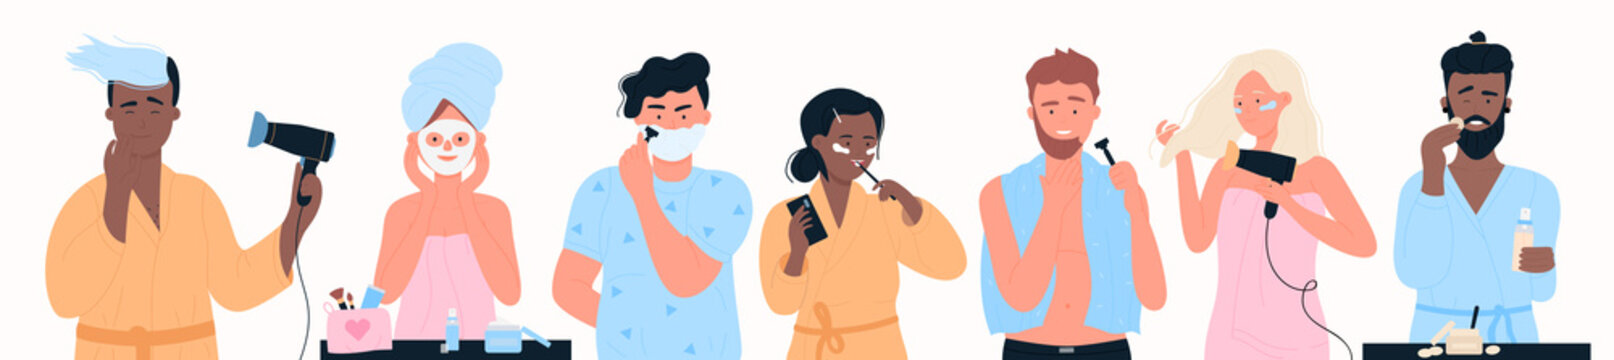 Morning routine of young people set vector illustration. Cartoon person drying hair with hairdryer in hands, man shaving, girl brushing teeth, cleaning skin isolated on white. Hygiene concept